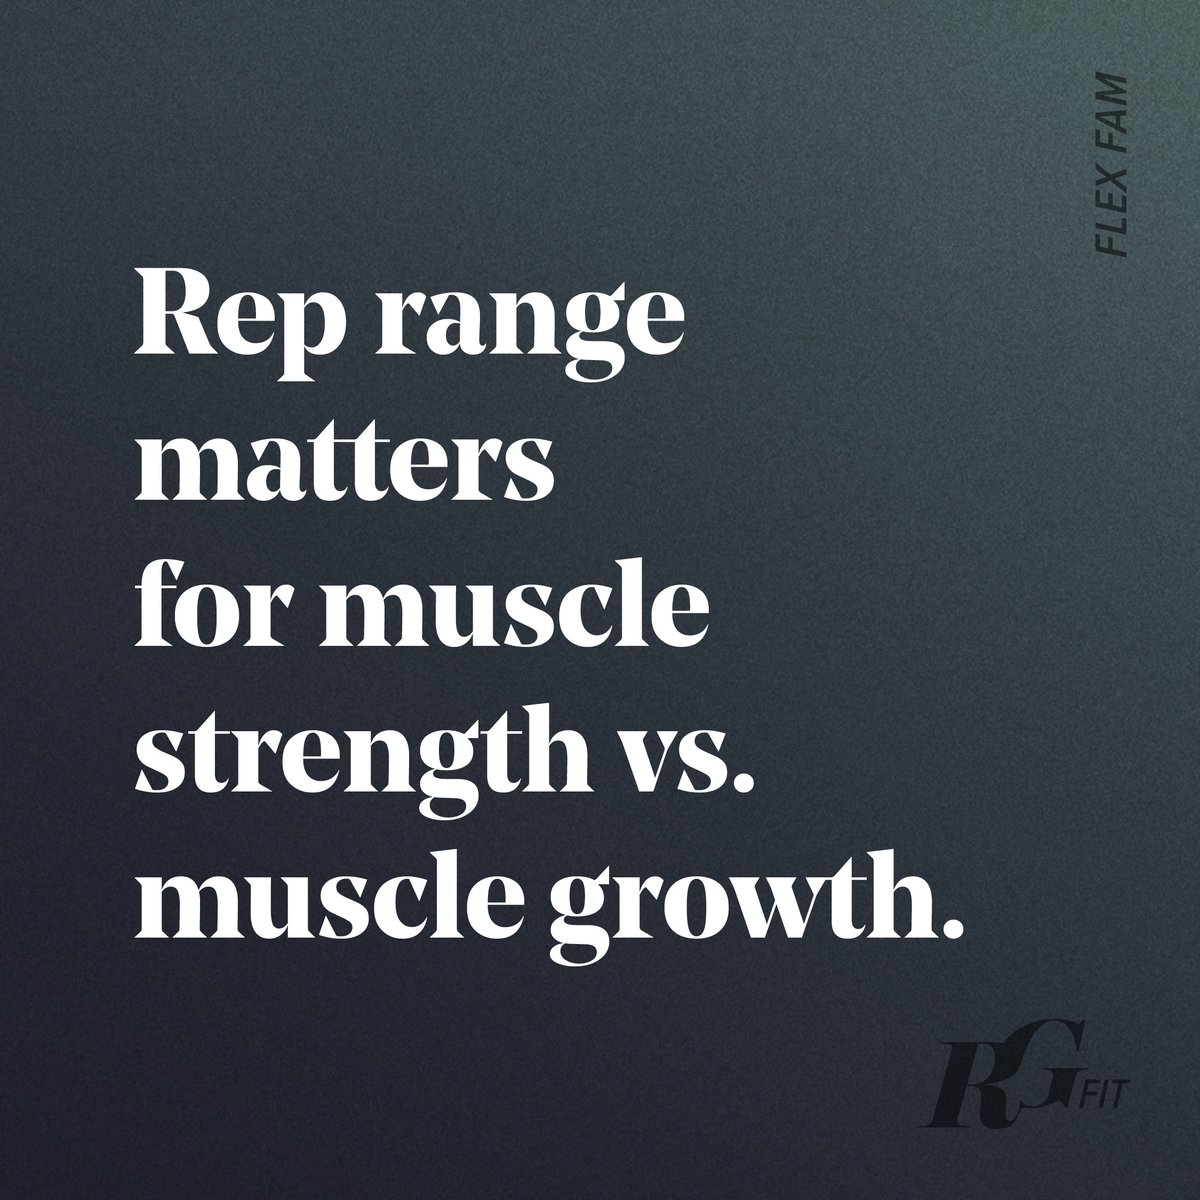 Aim for the 1-6 rep range for muscle strength and 6-12 reps for efficient muscle growth.

#fitness #fitnessmotivation #weightlifting #girlswholift #womenwholift #getstrong #liftheavy #resistancetraining #gymlife #workouttips #workout #liftheavyshit